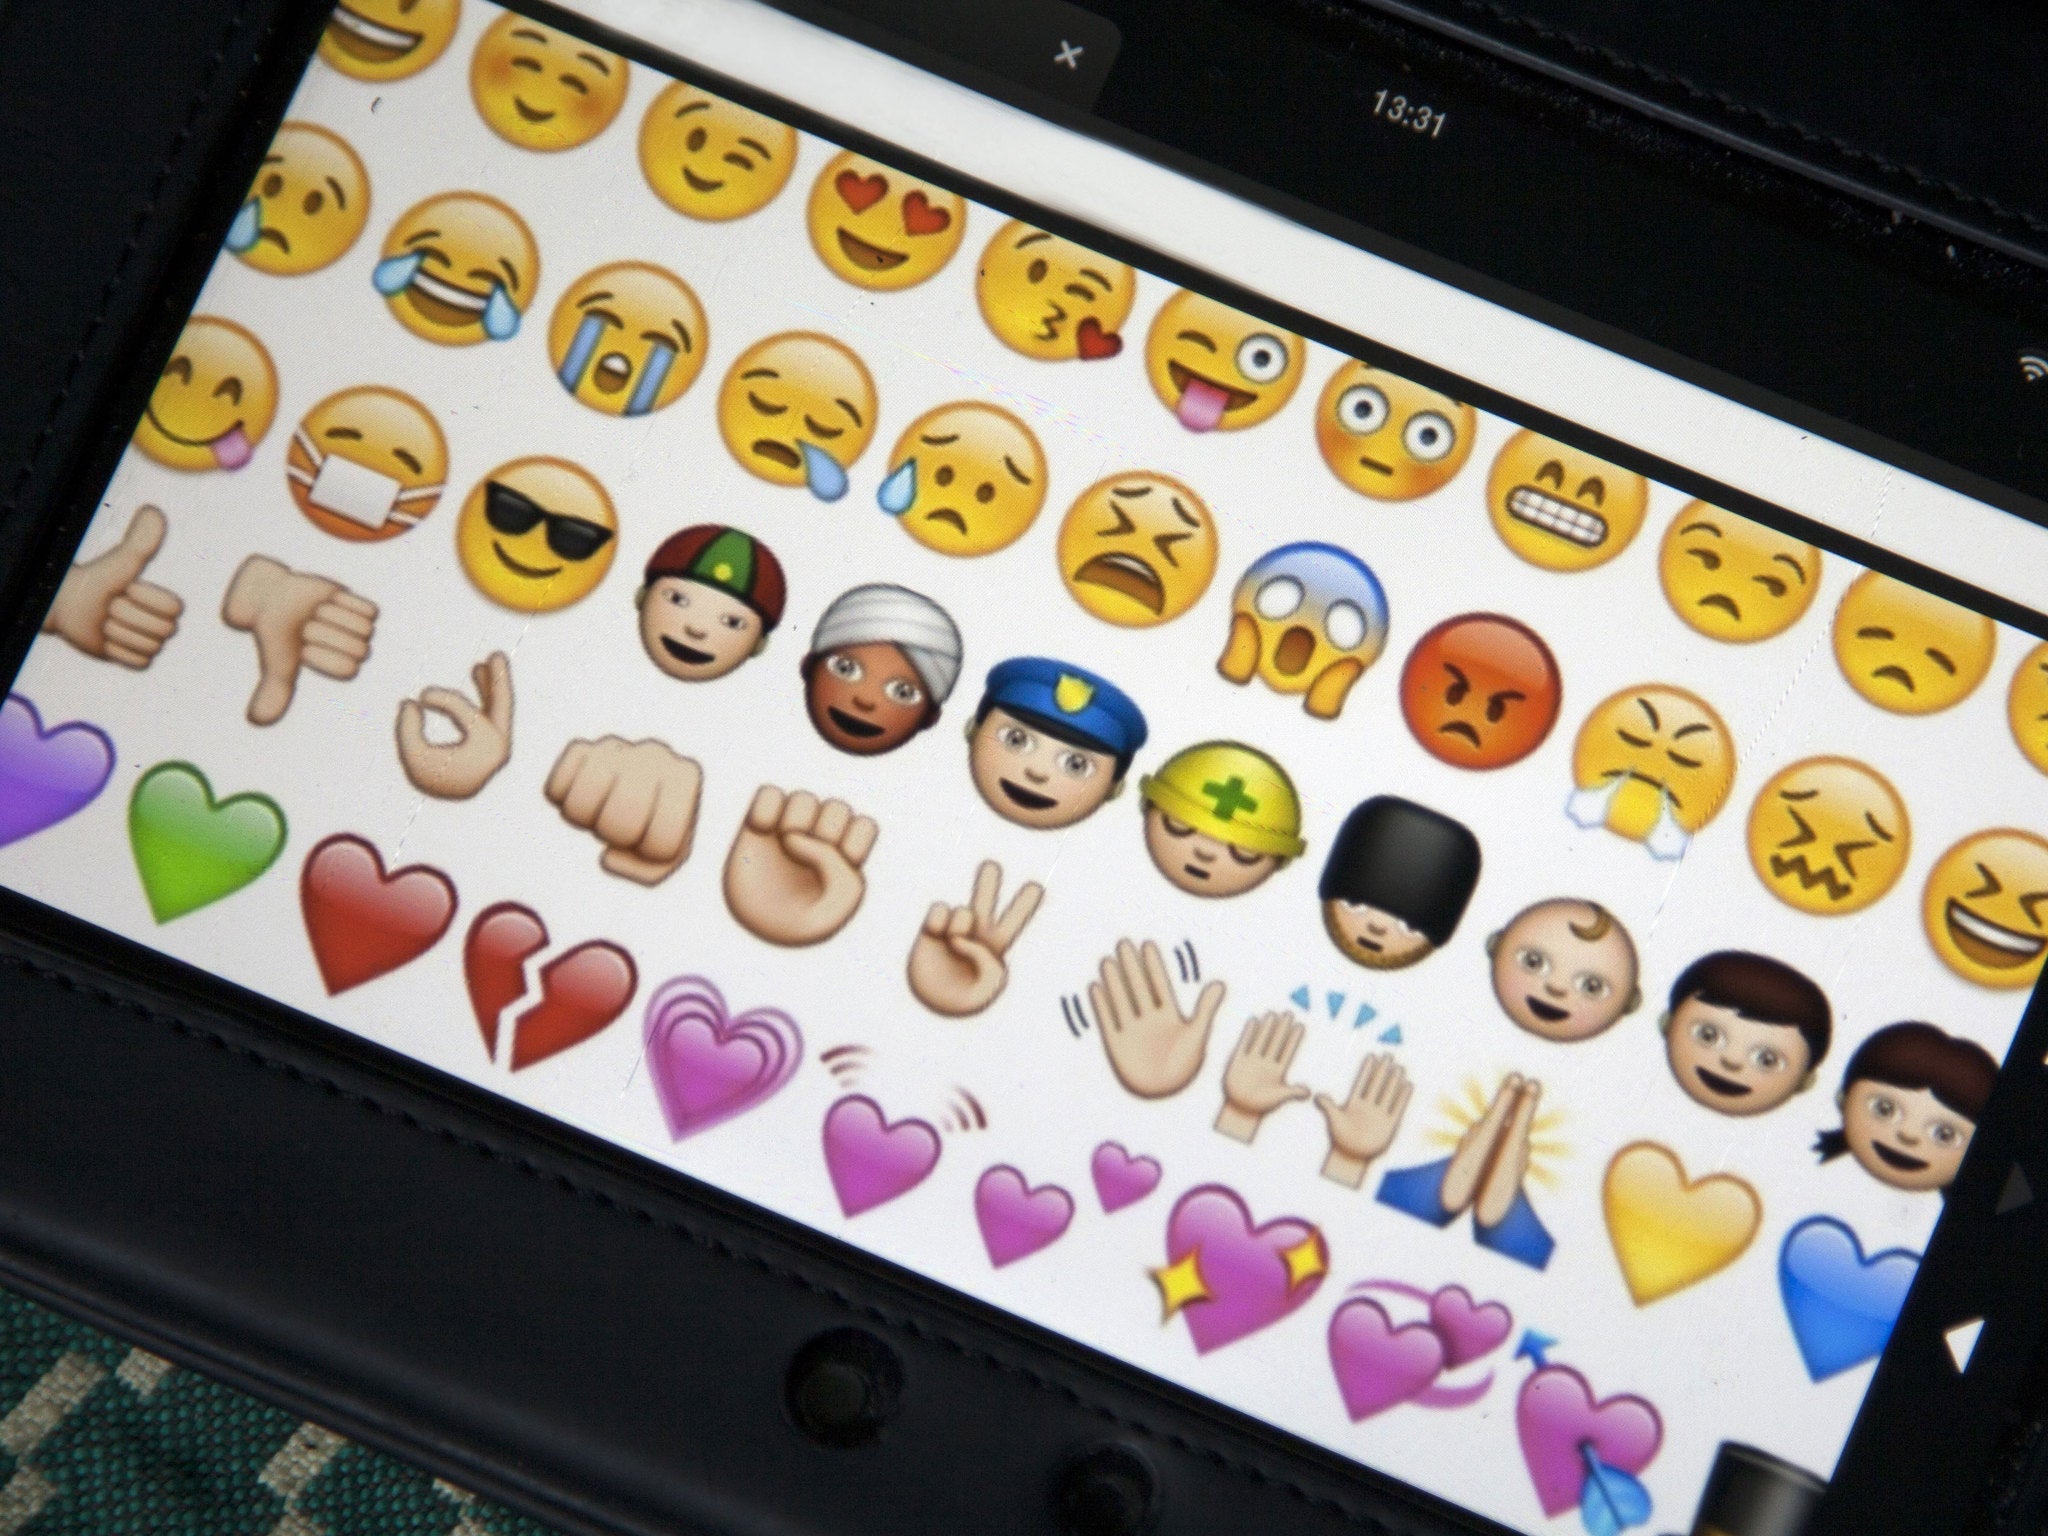 The heart emoji was this year's most popular words